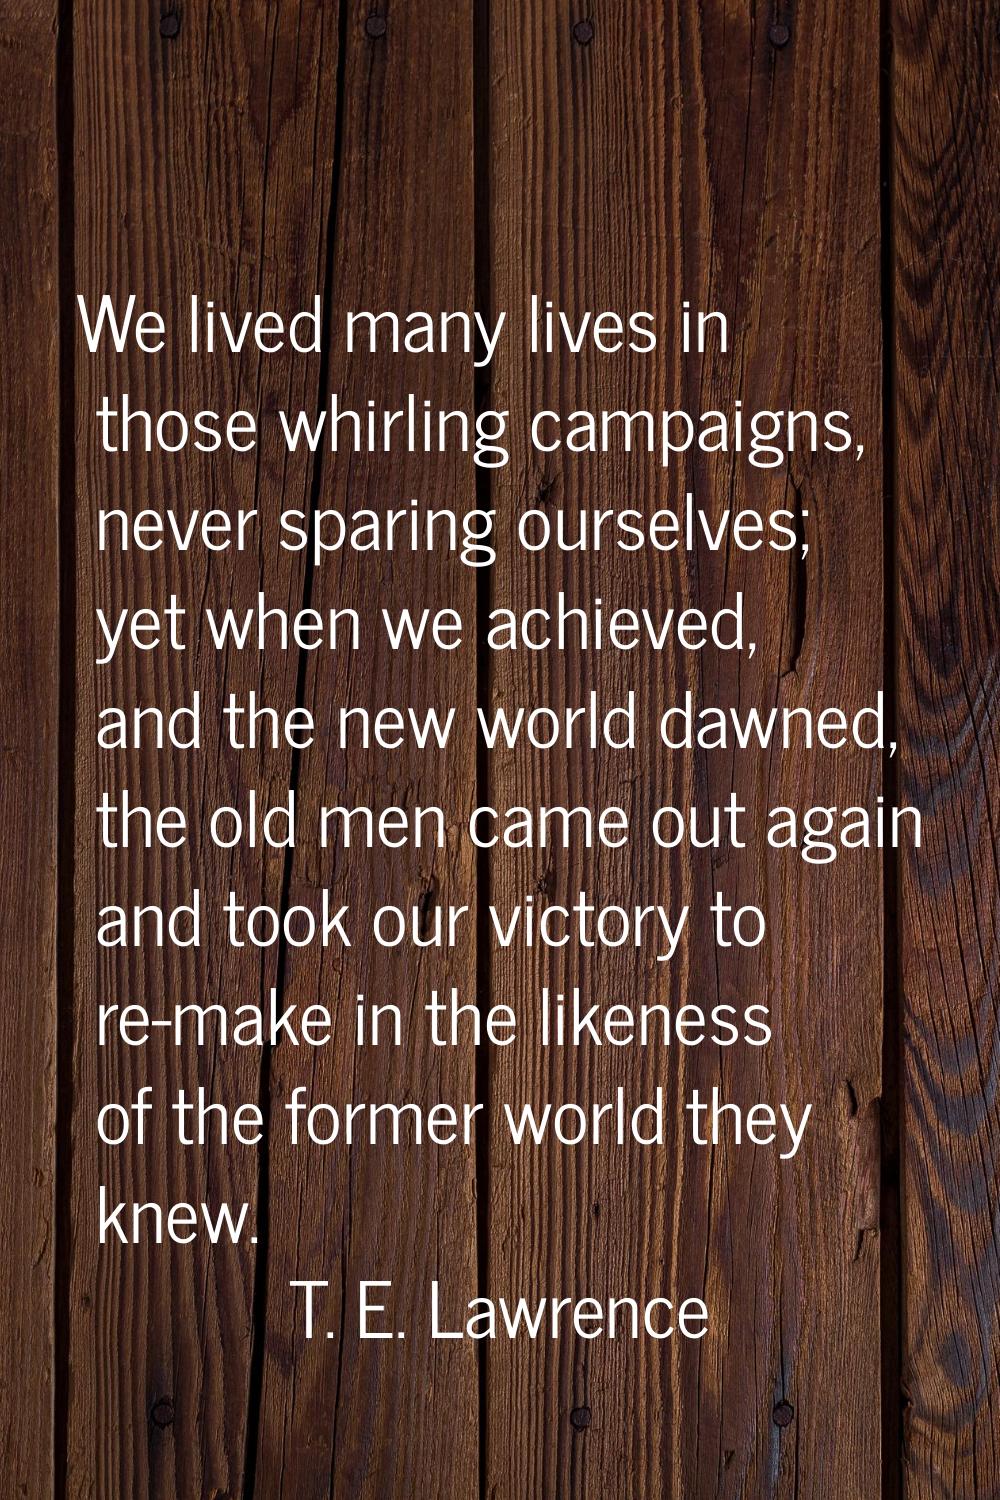 We lived many lives in those whirling campaigns, never sparing ourselves; yet when we achieved, and